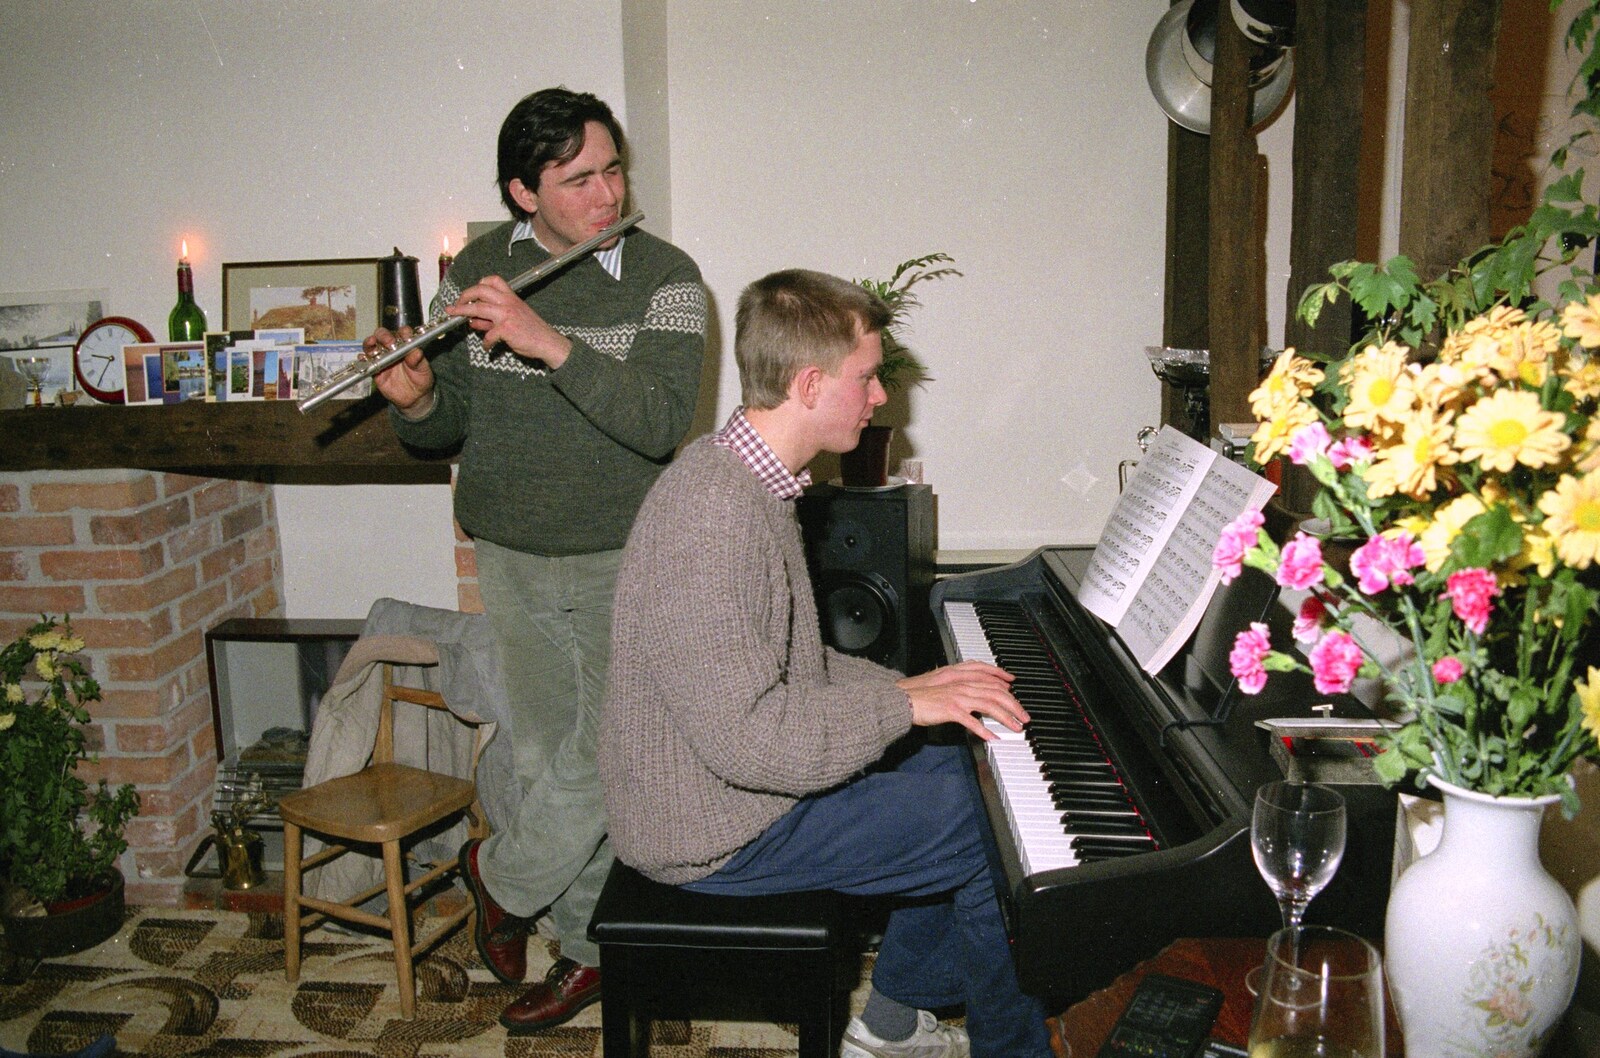 David plays flute to some piano accompaniment from Sledging on the Common and Some Music, Stuston, Suffolk - 5th February 1991